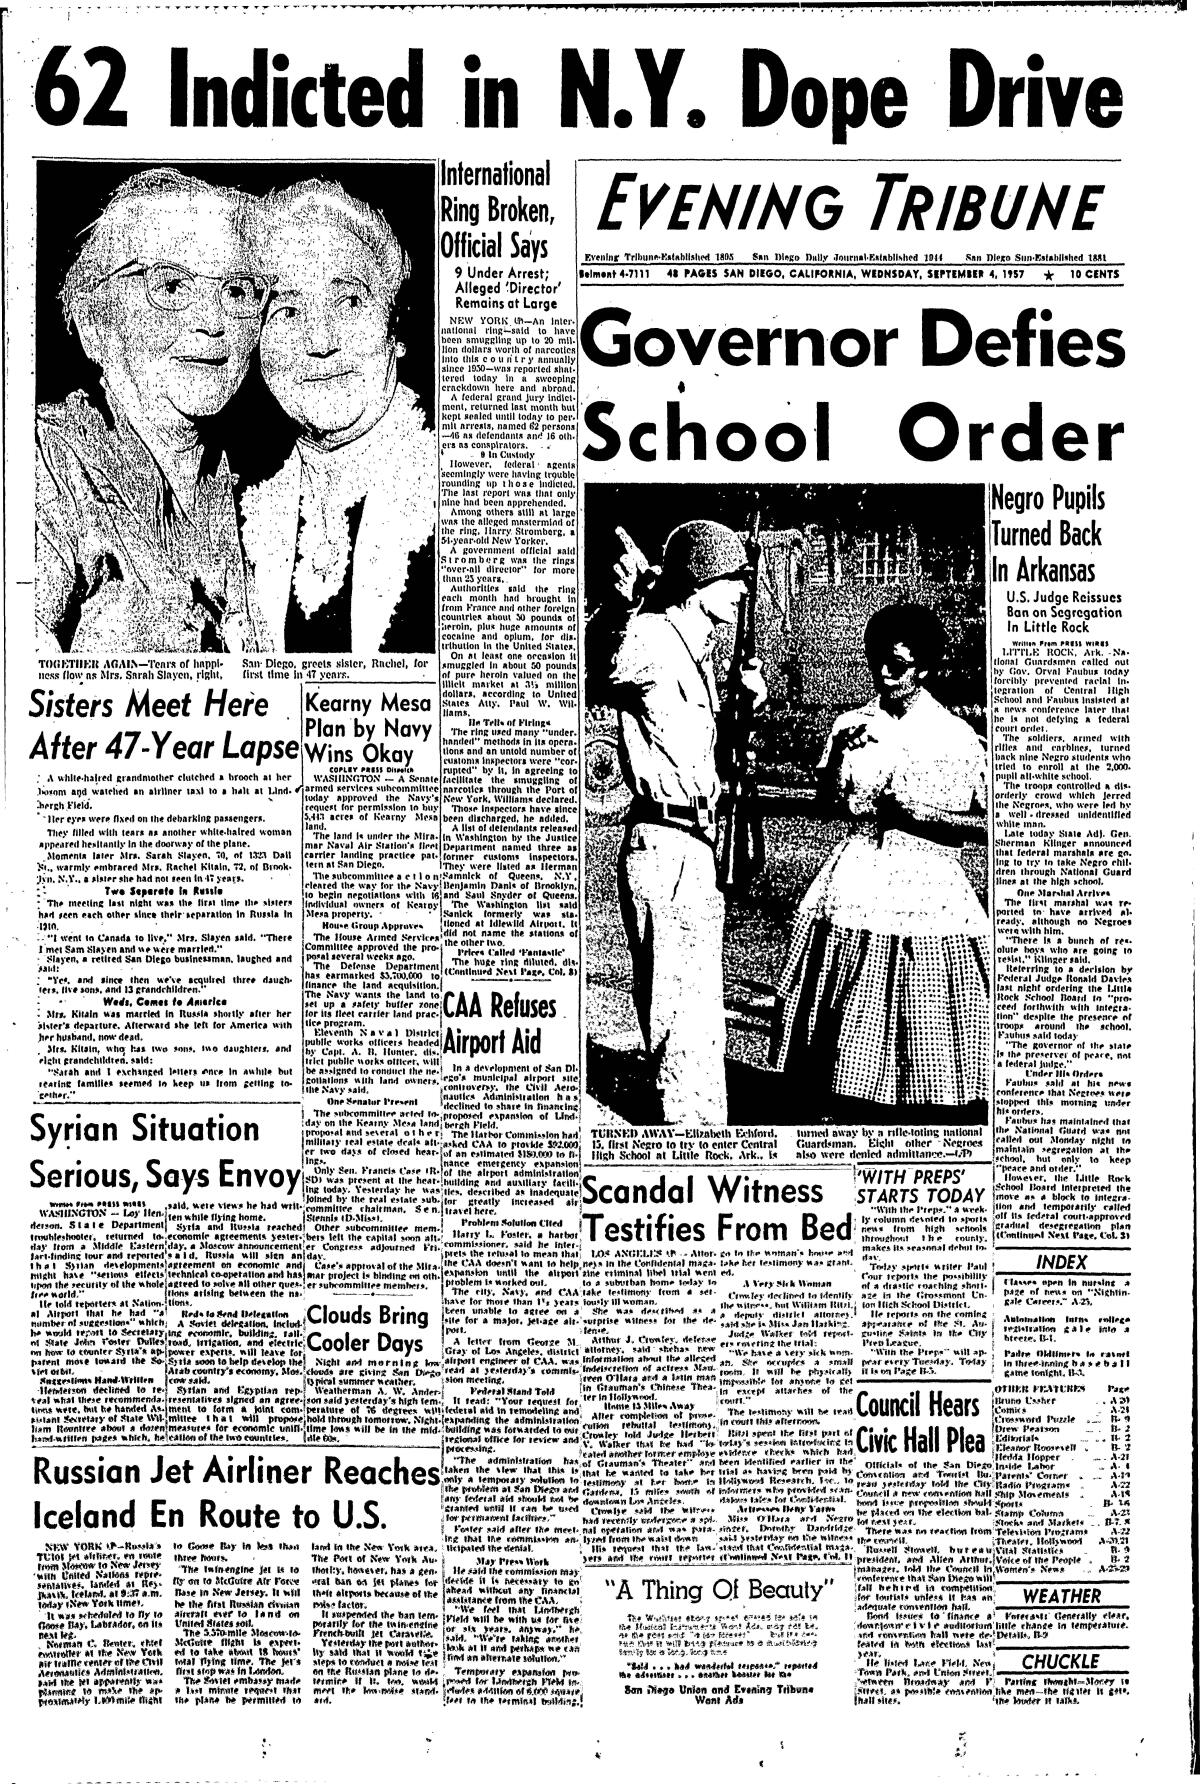 Front page of the Evening Tribune, Wednesday, Sept. 4, 1957.